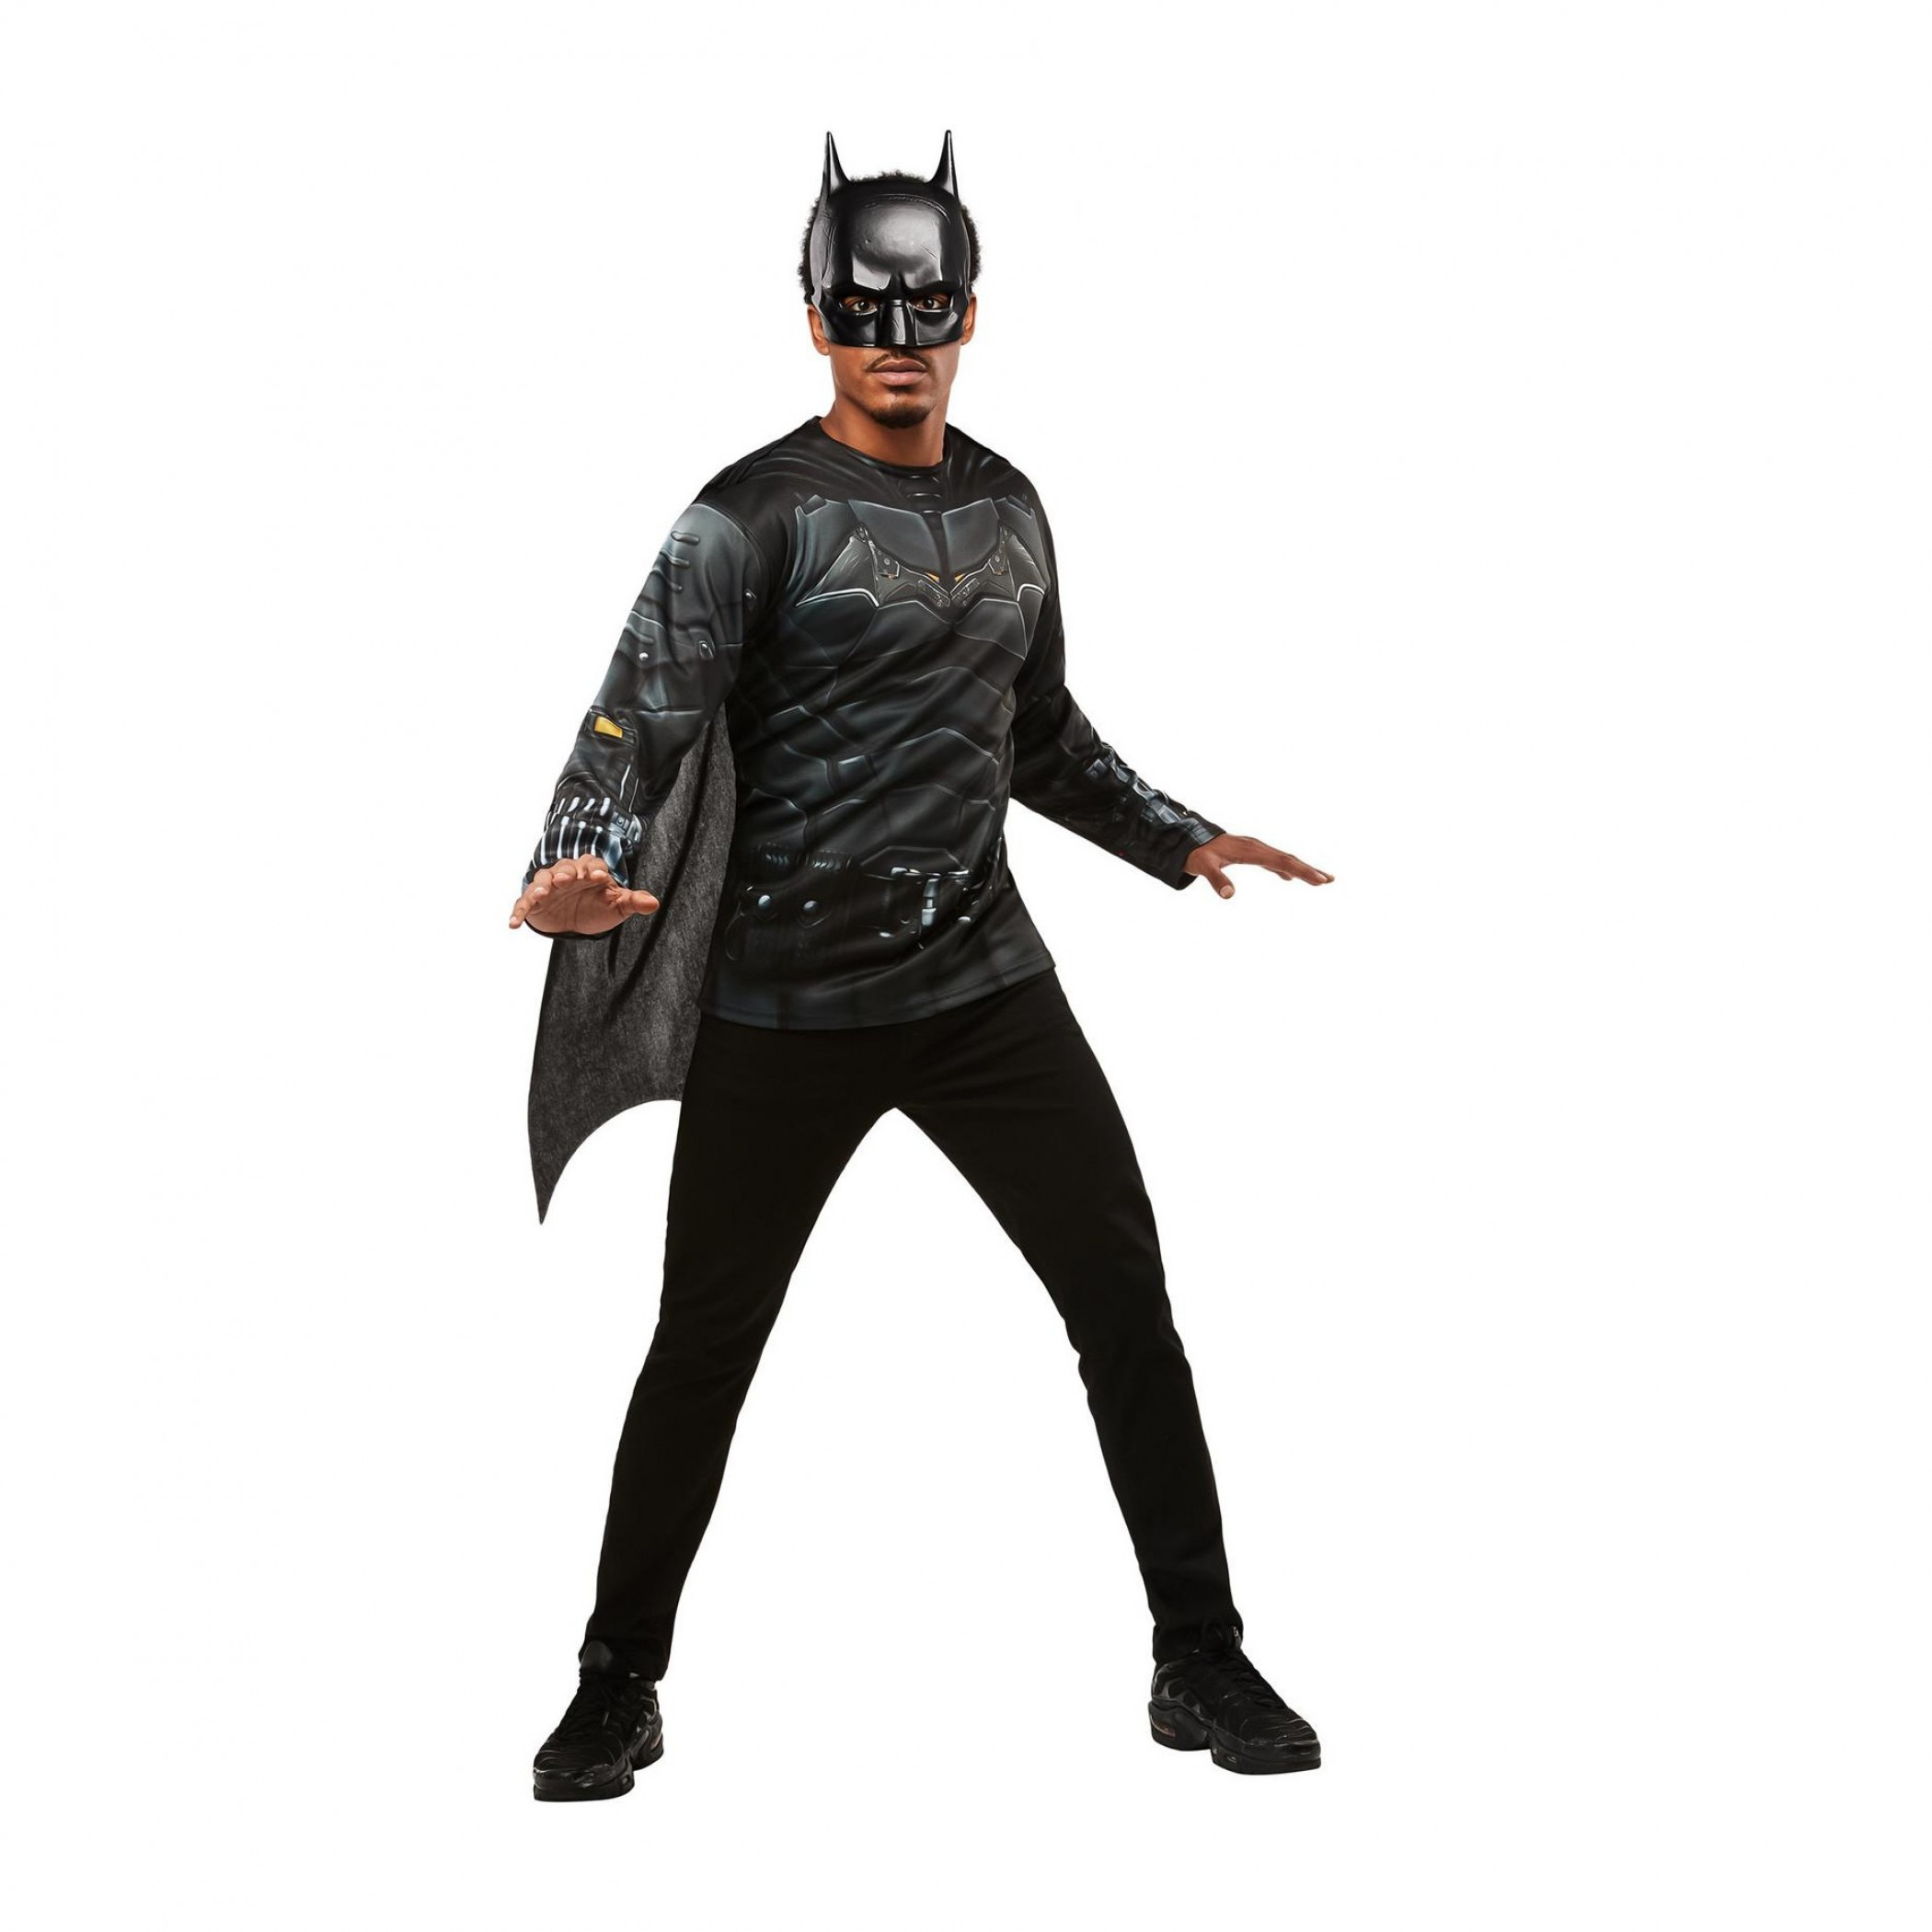 The Batman Movie Complete Adult Costume with Cape